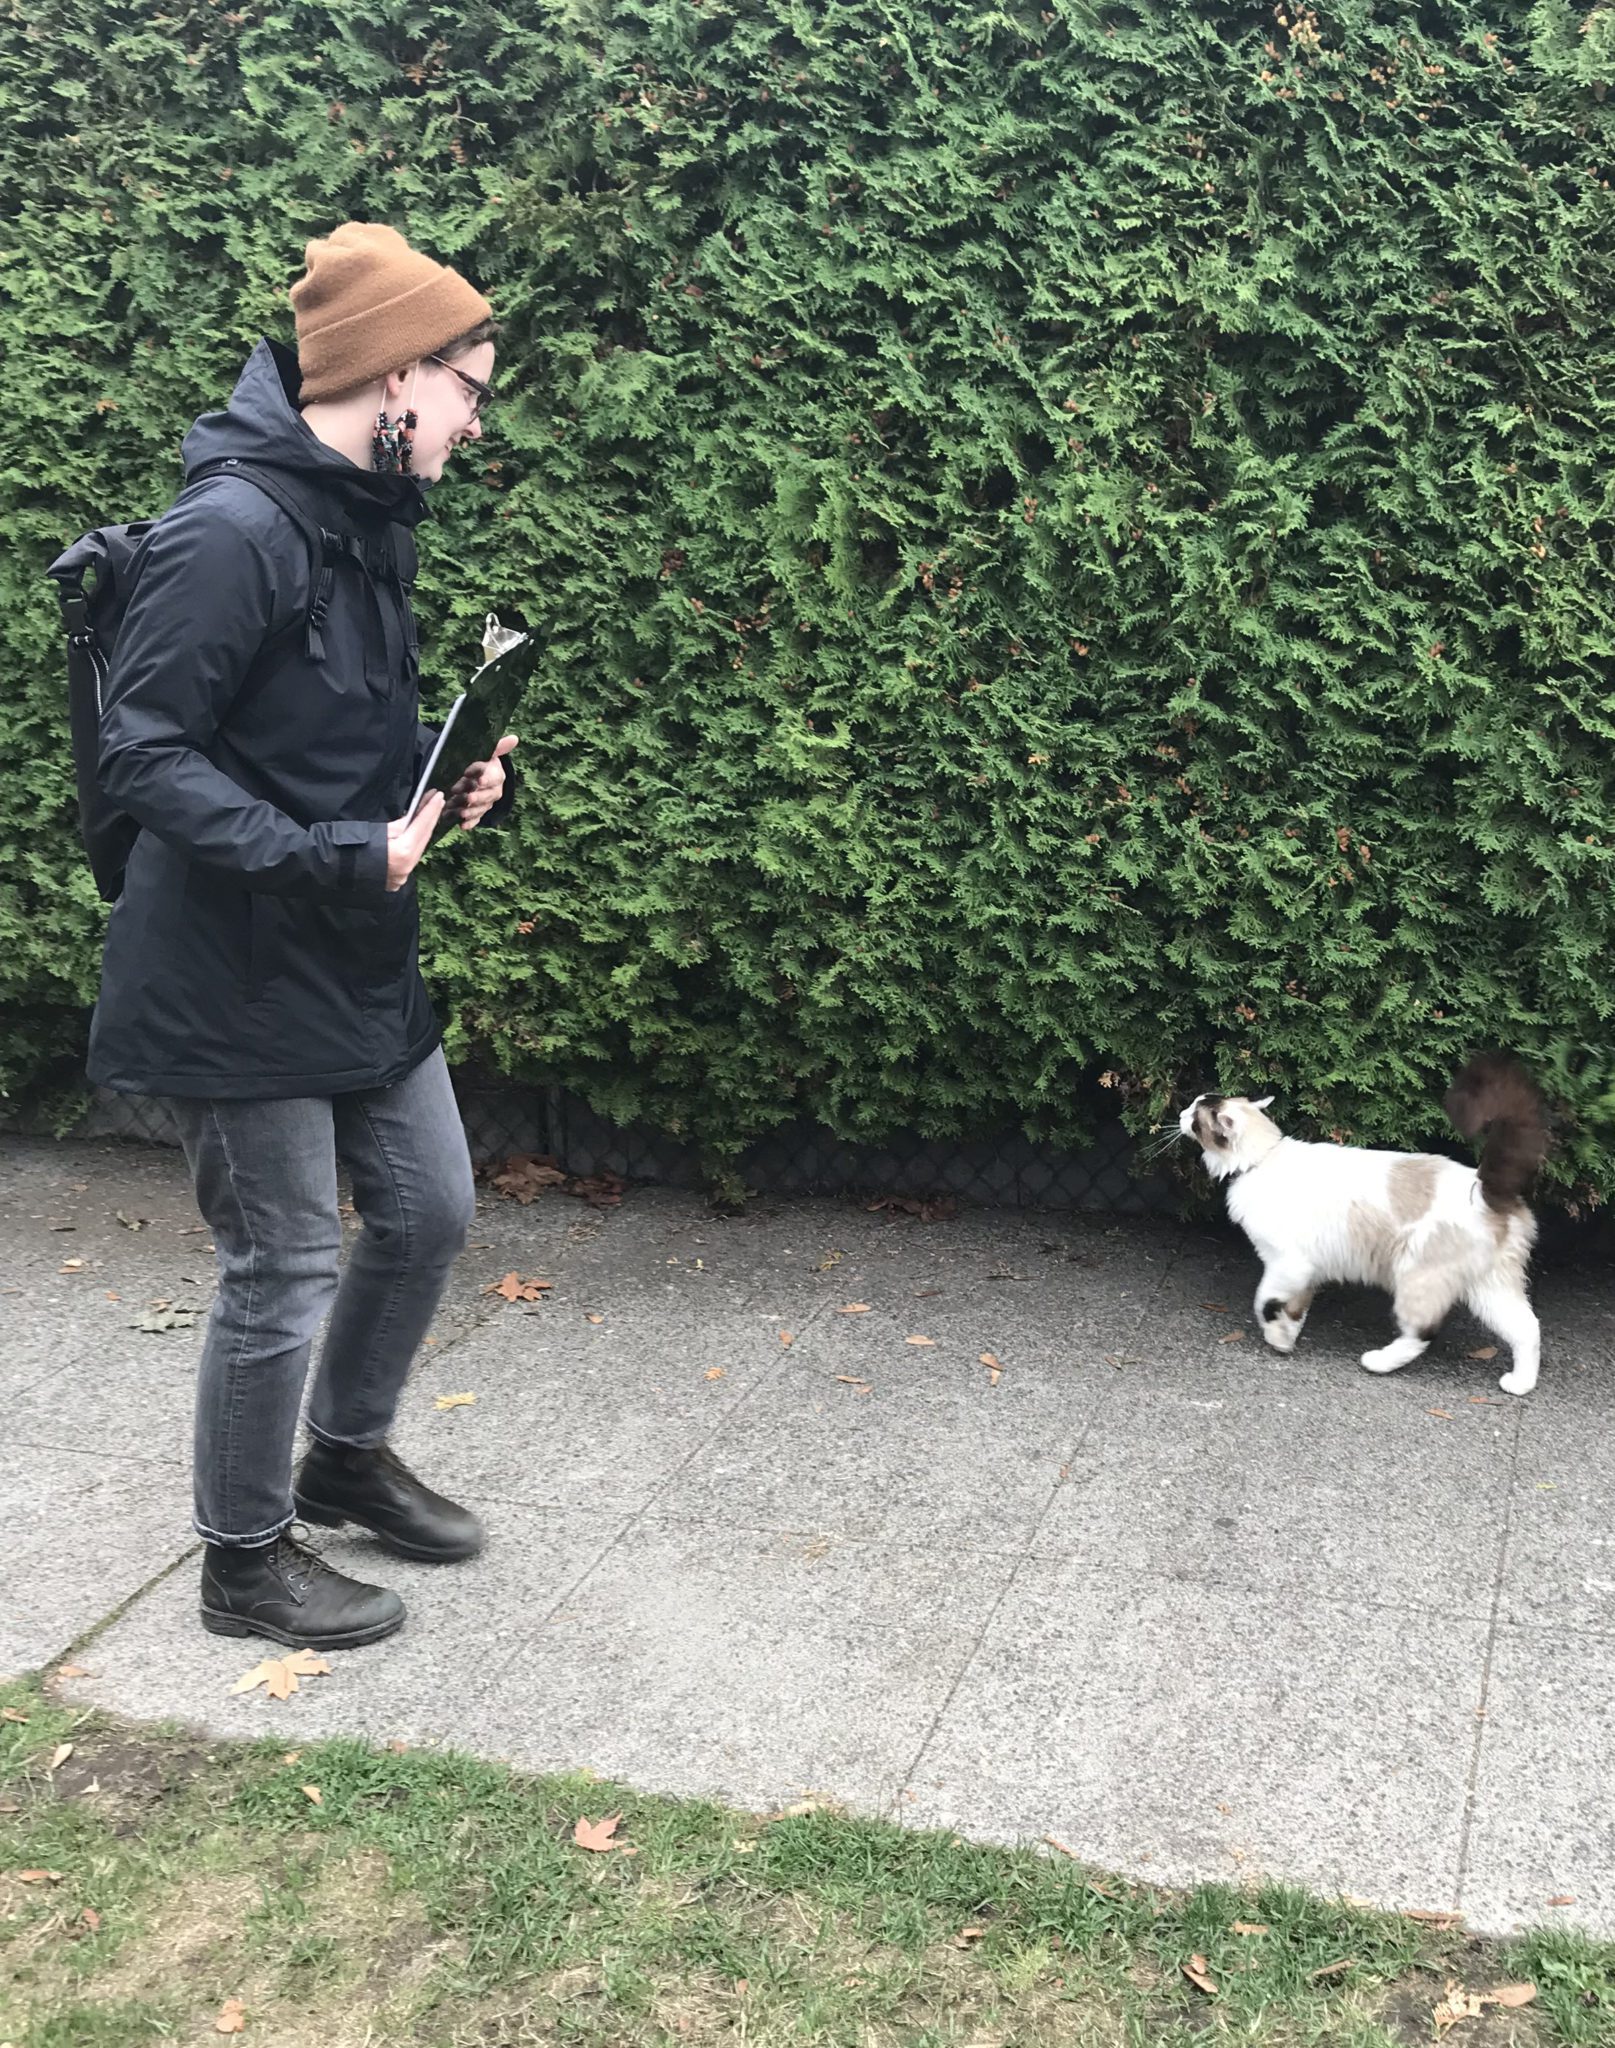 Susanna Ryan, a woman wearing a black jacket and holding a clipboard, walks along a sidewalk in Seattle, where she encounters a white cat. Green hedges are visible in the background.